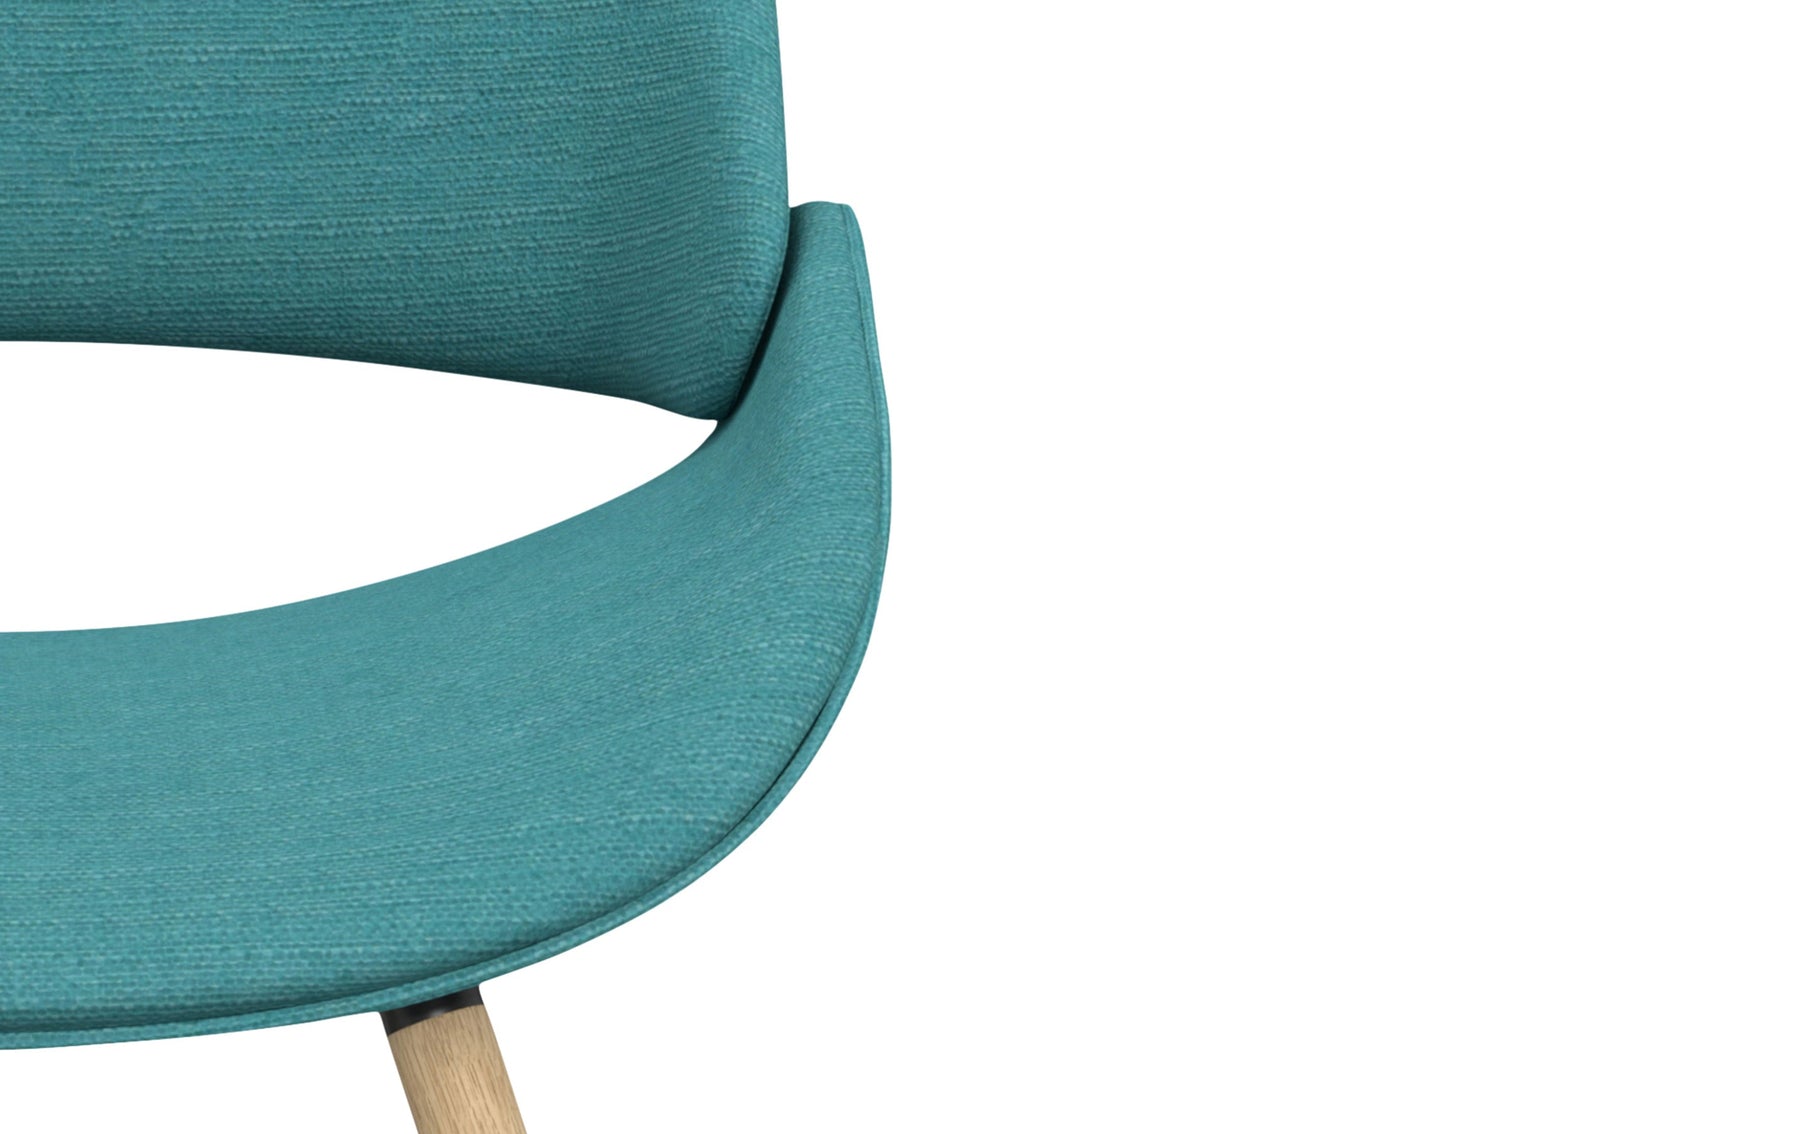 Turquoise Blue Natural Oak | Malden Bentwood Dining Chair